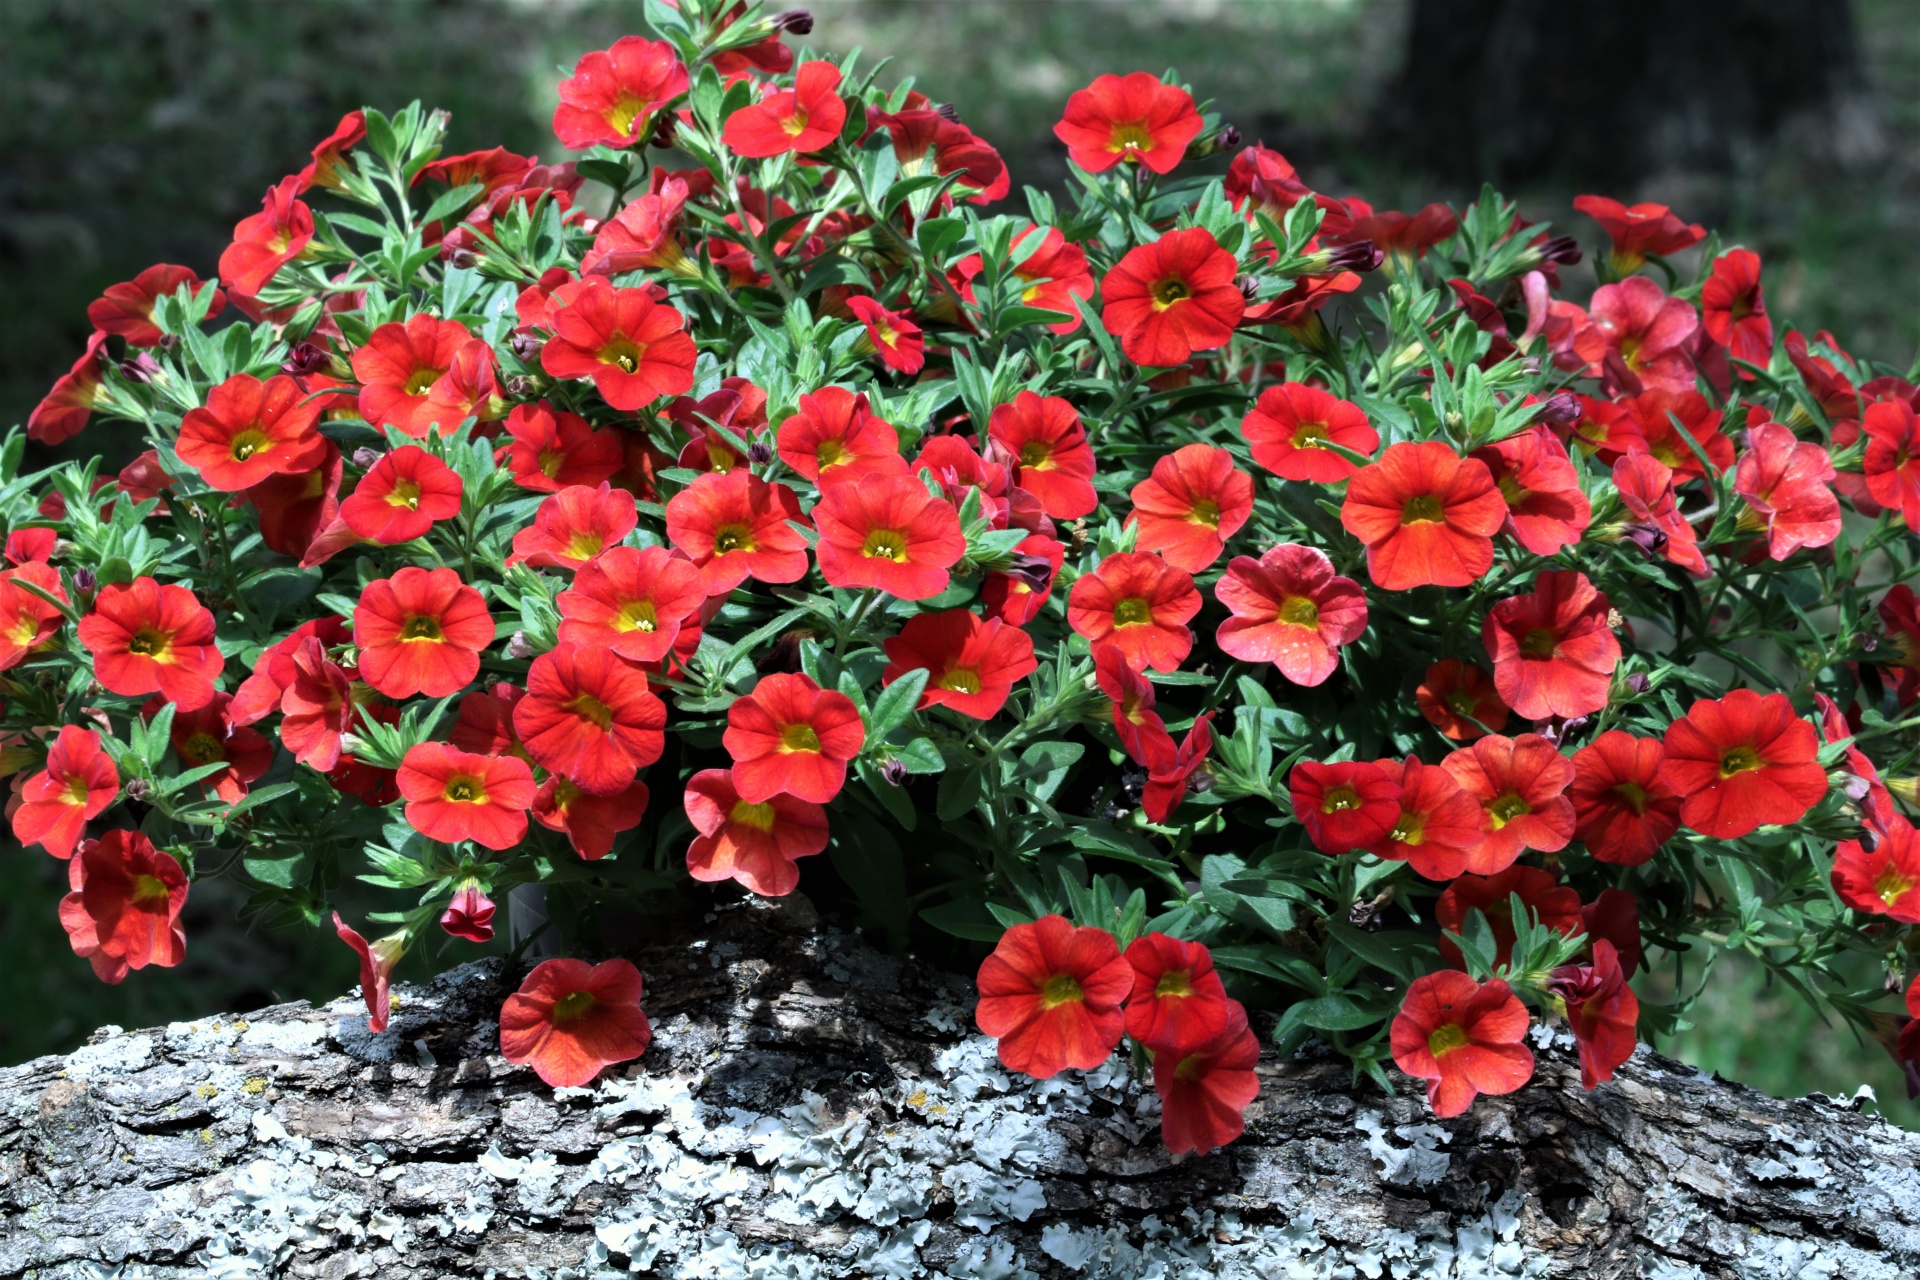 Close-up of a basket of bright red mini petunias sitting behind a tree branch, with a dark background.